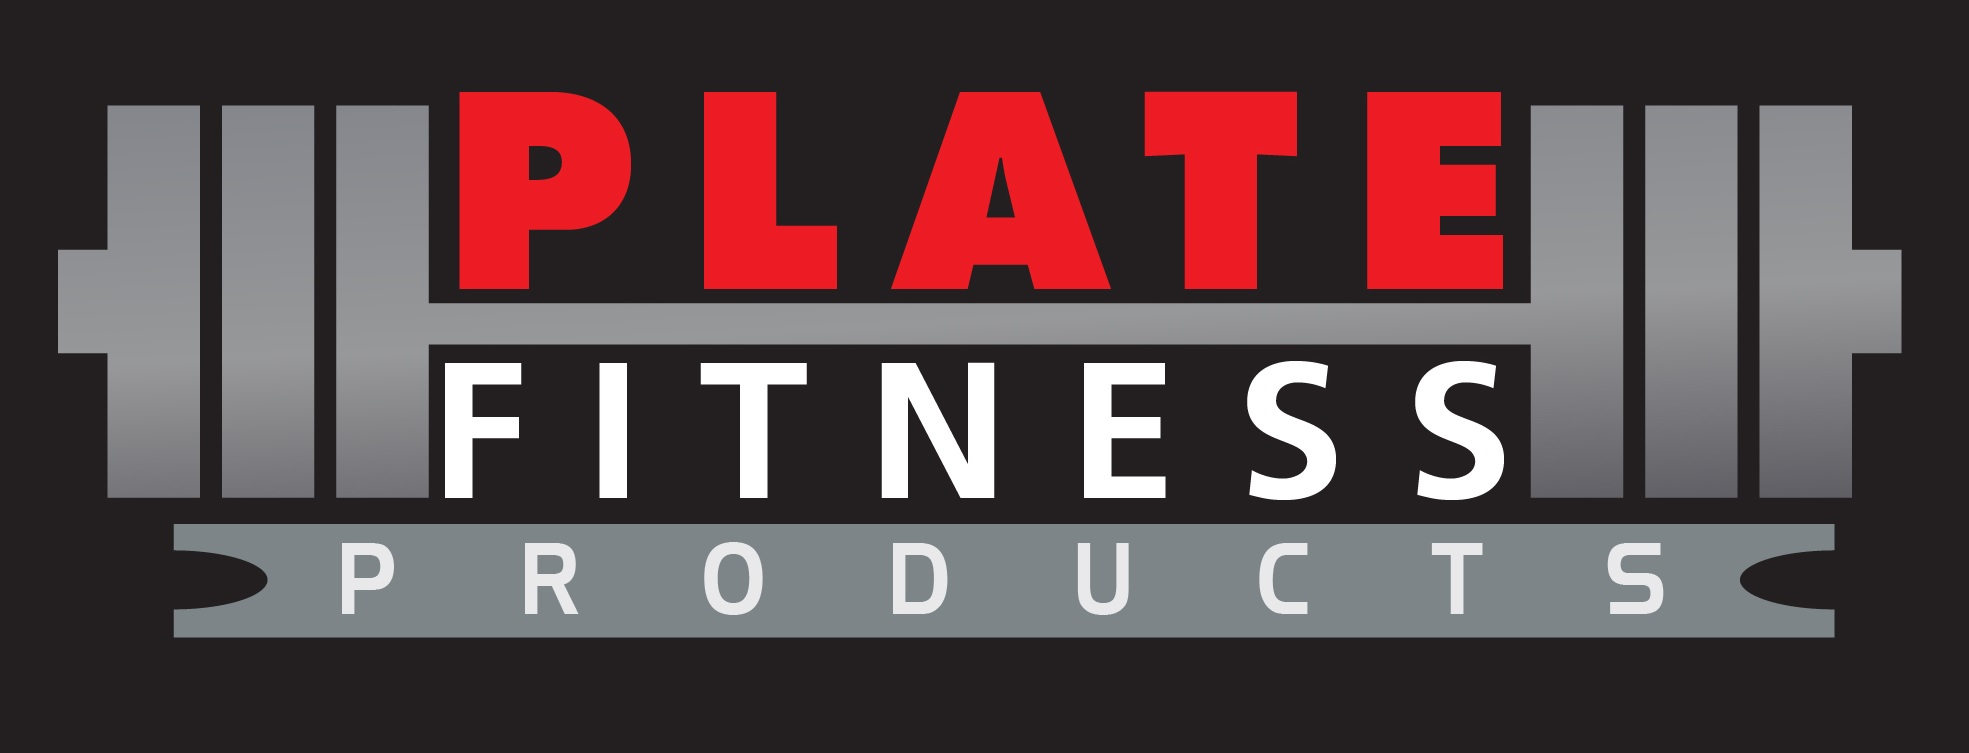 PLATE FITNESS PRODUCTS Logo